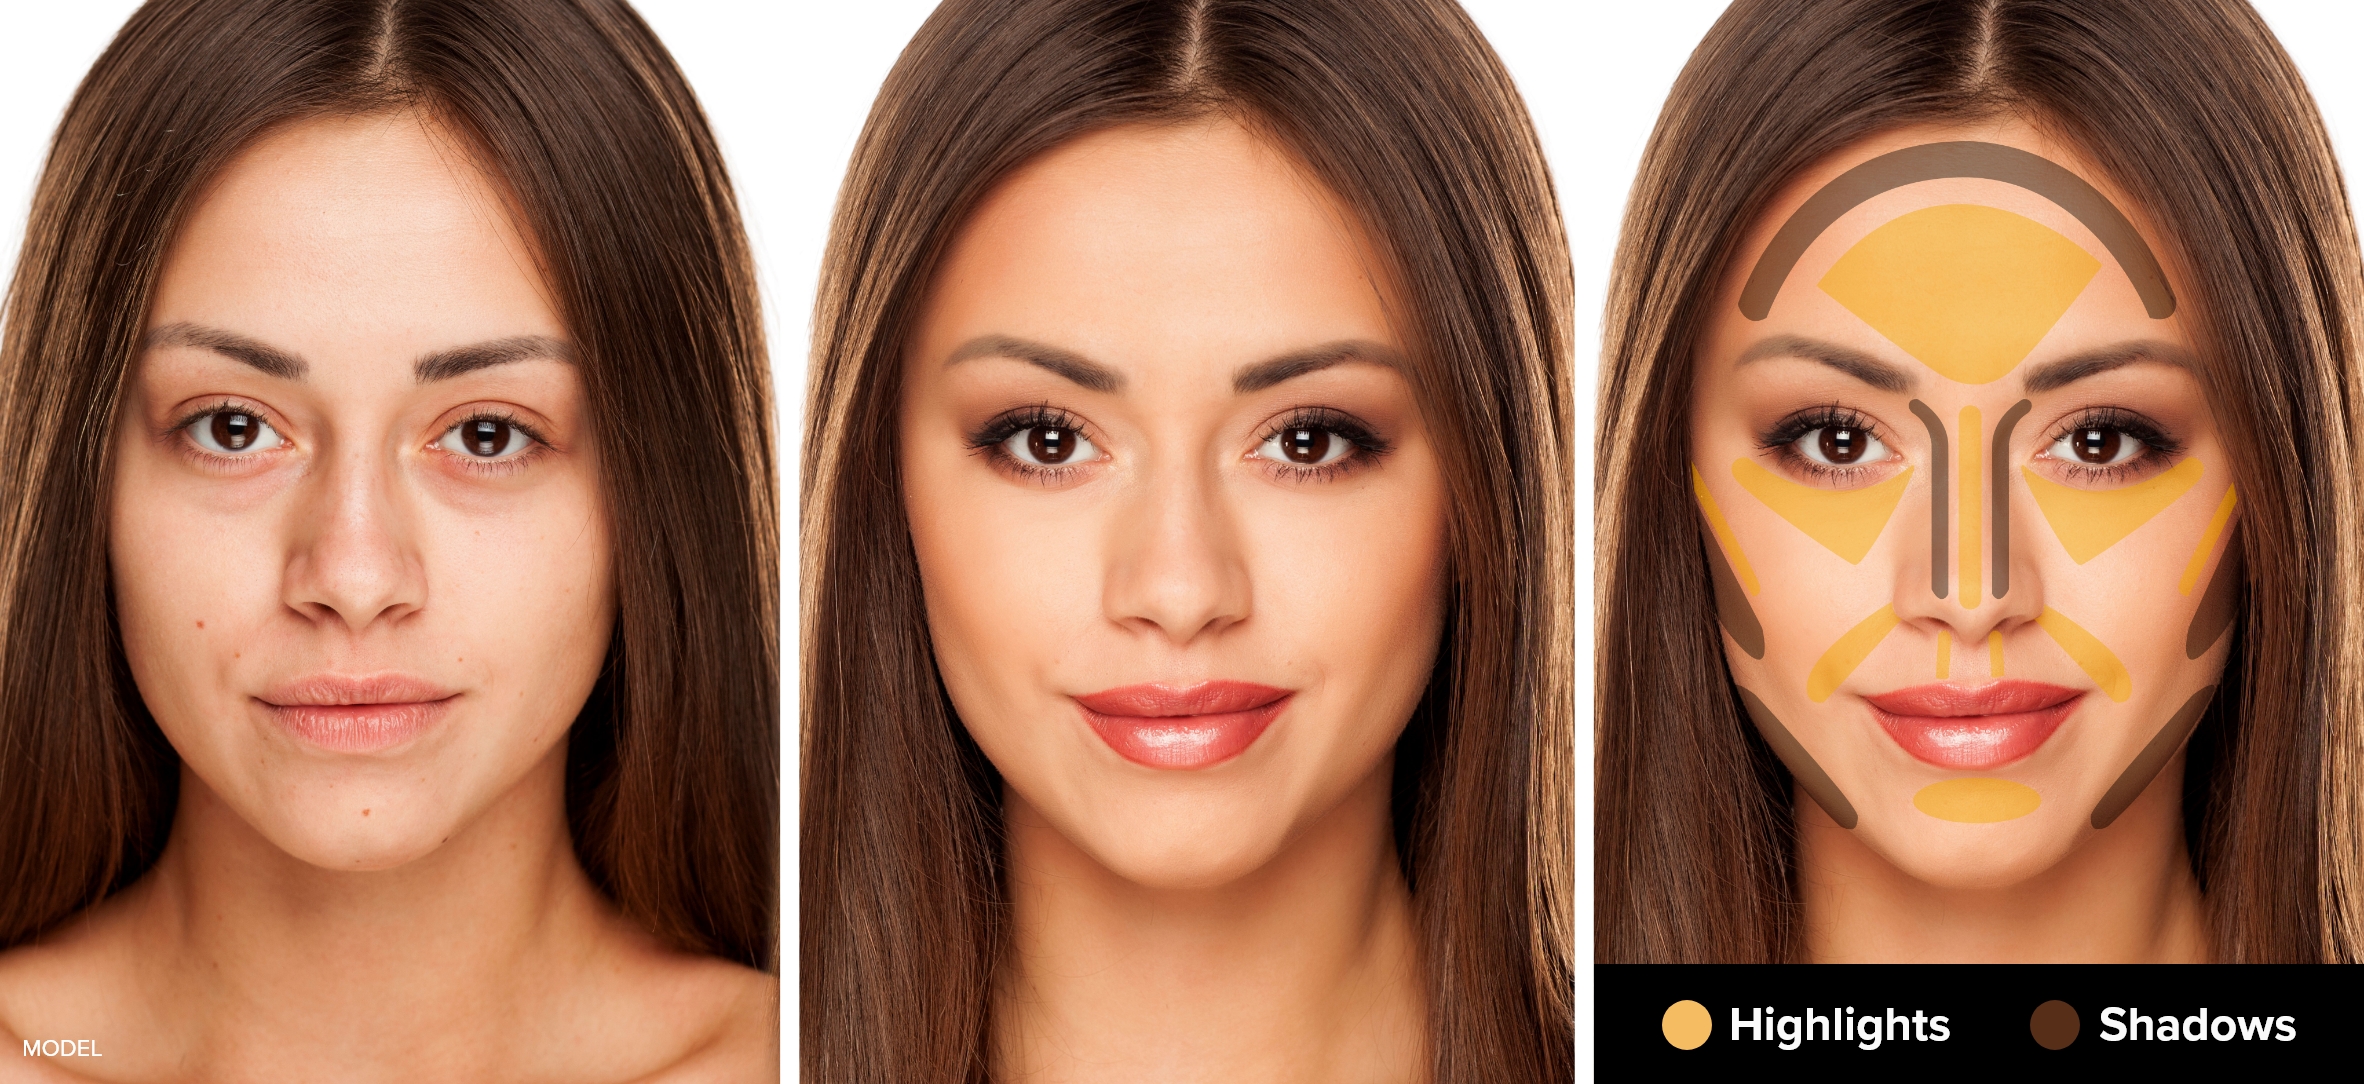 Contouring with highlights and shadows